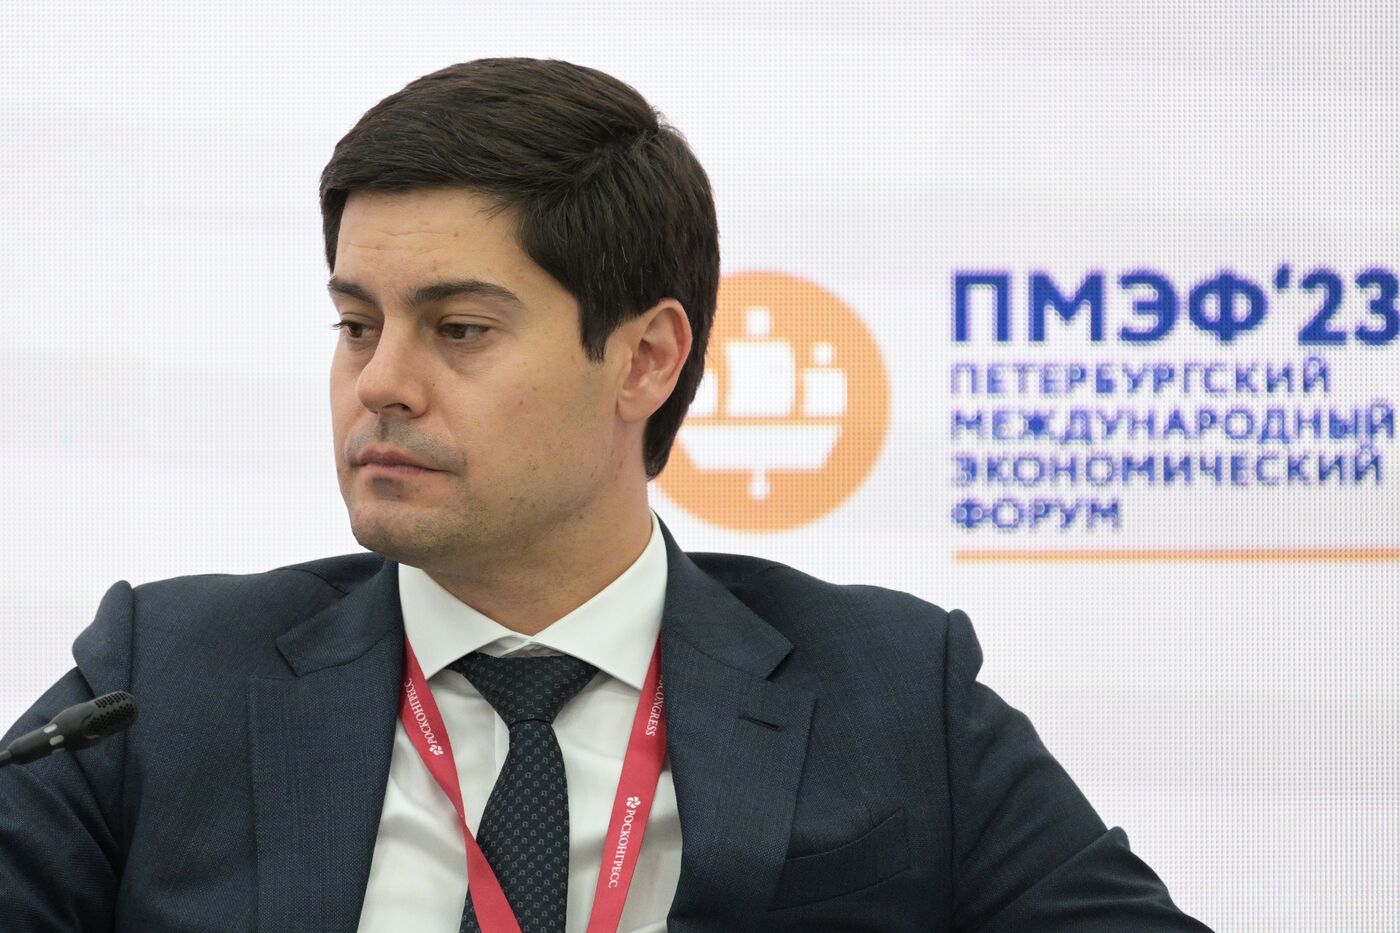 SPIEF-2023. Multipolarity and Connectedness as a New Paradigm of International Trade